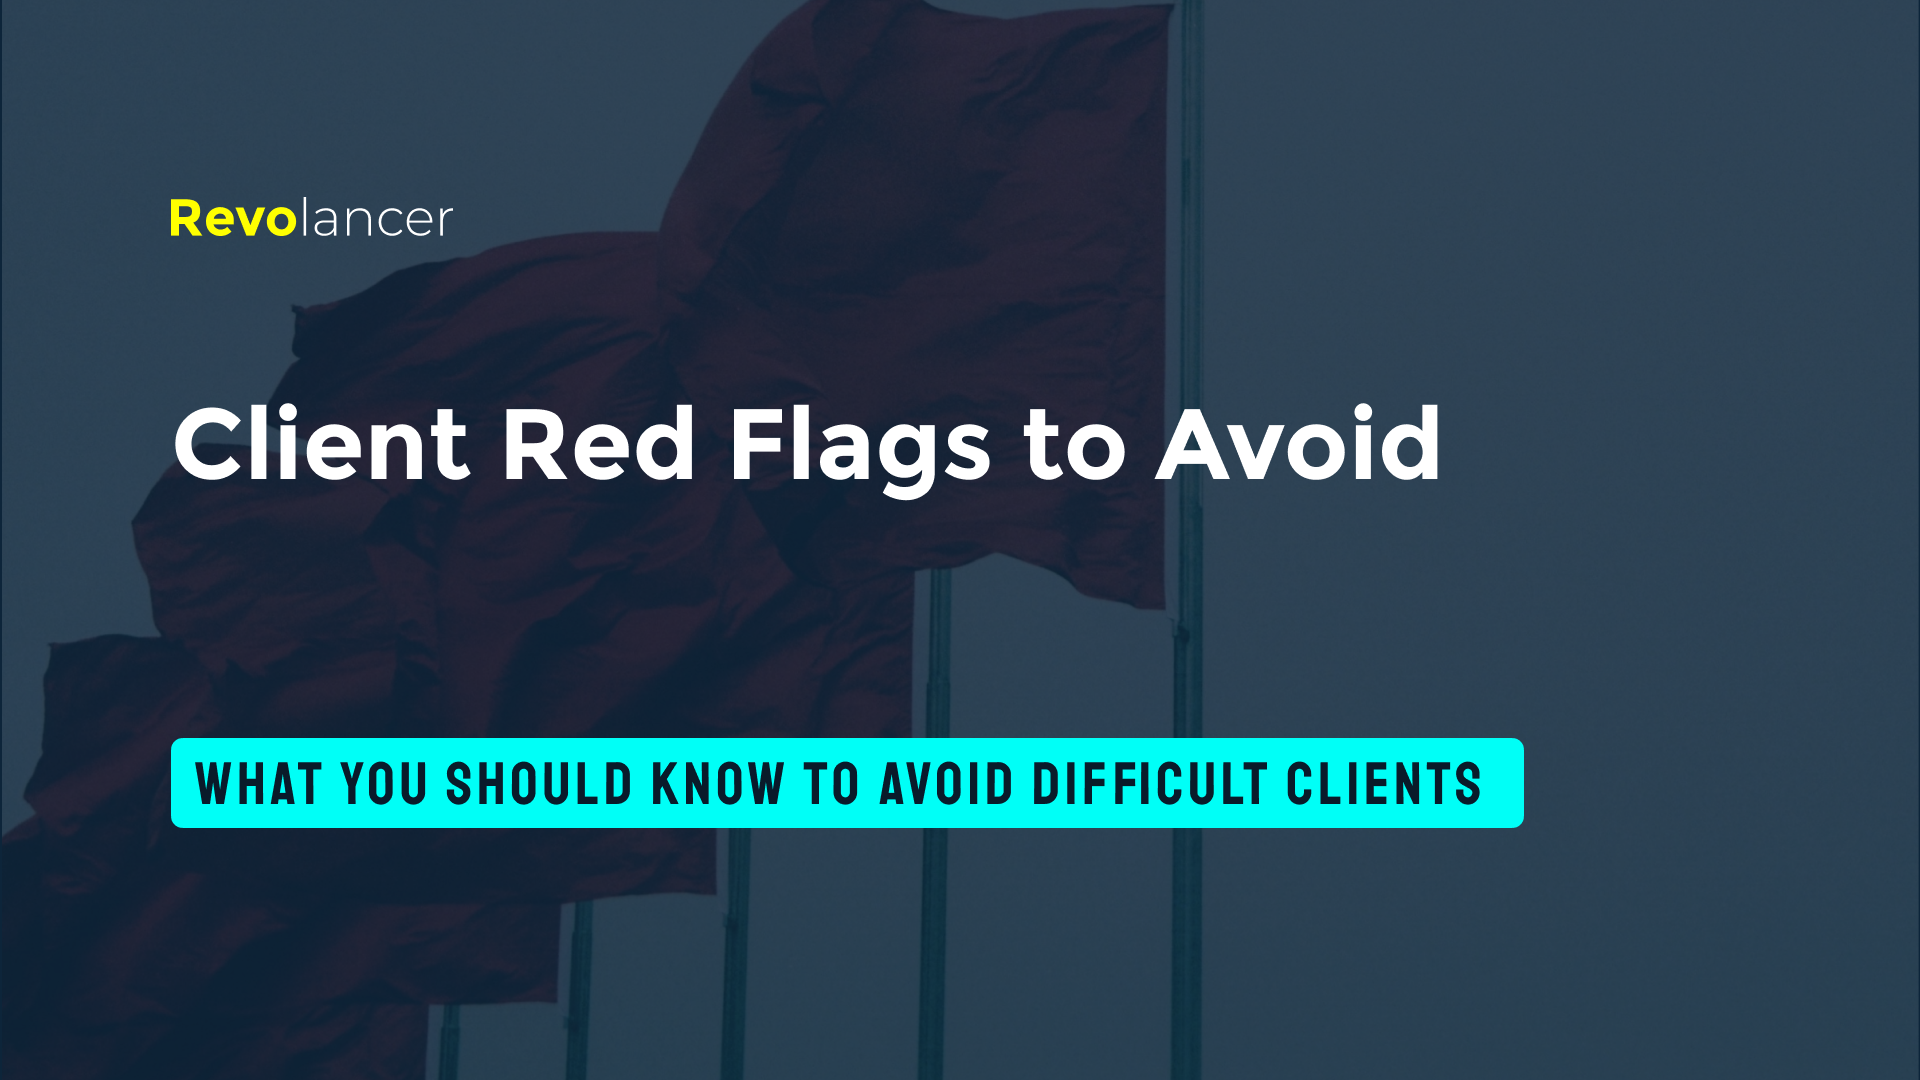 Client Red Flags to Avoid